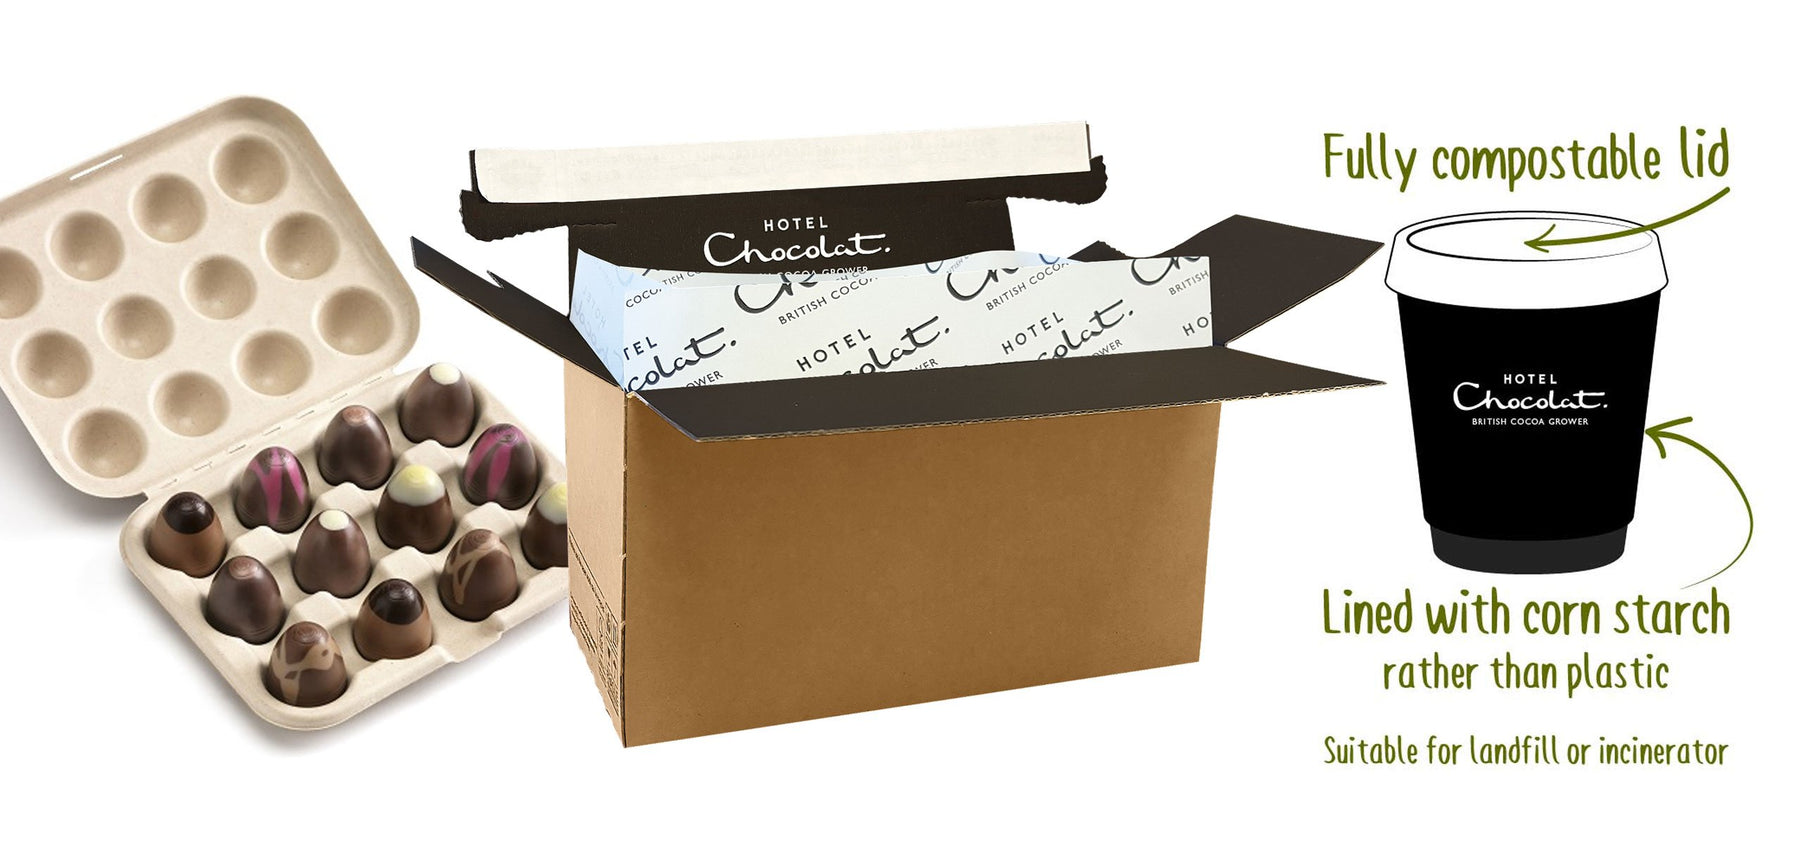 Looking to the Future - Hotel Chocolat's Commitment to Ethical Packaging